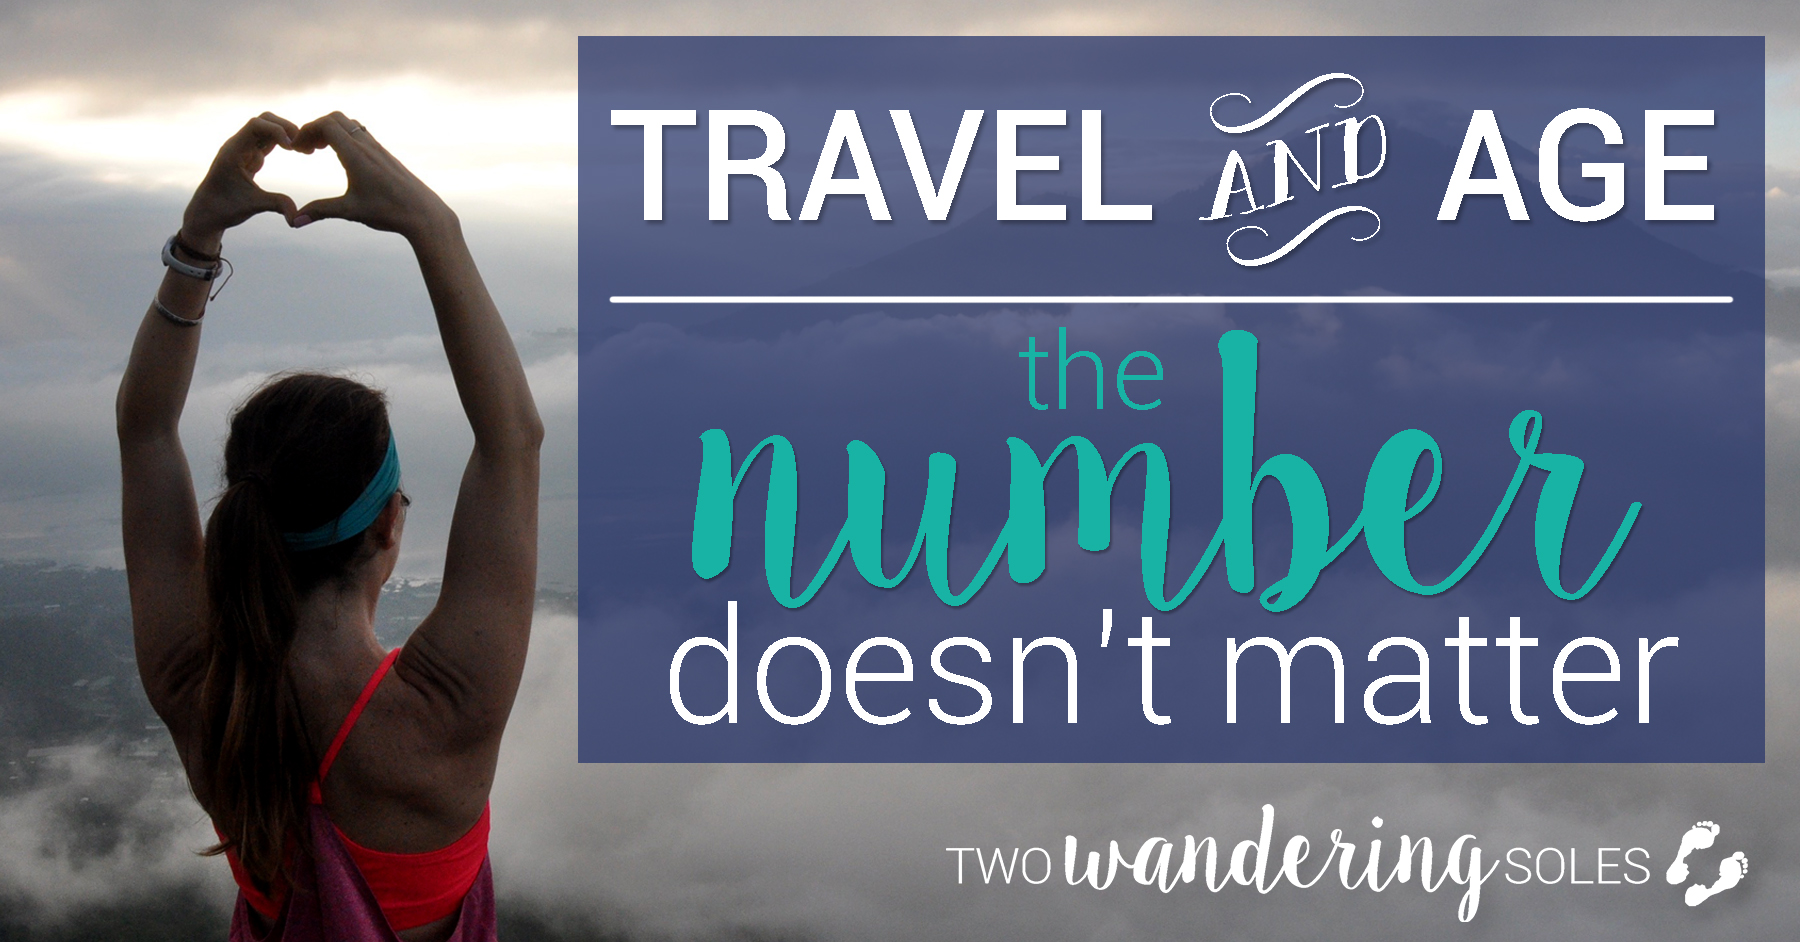 Travel and Age: the number doesn't matter